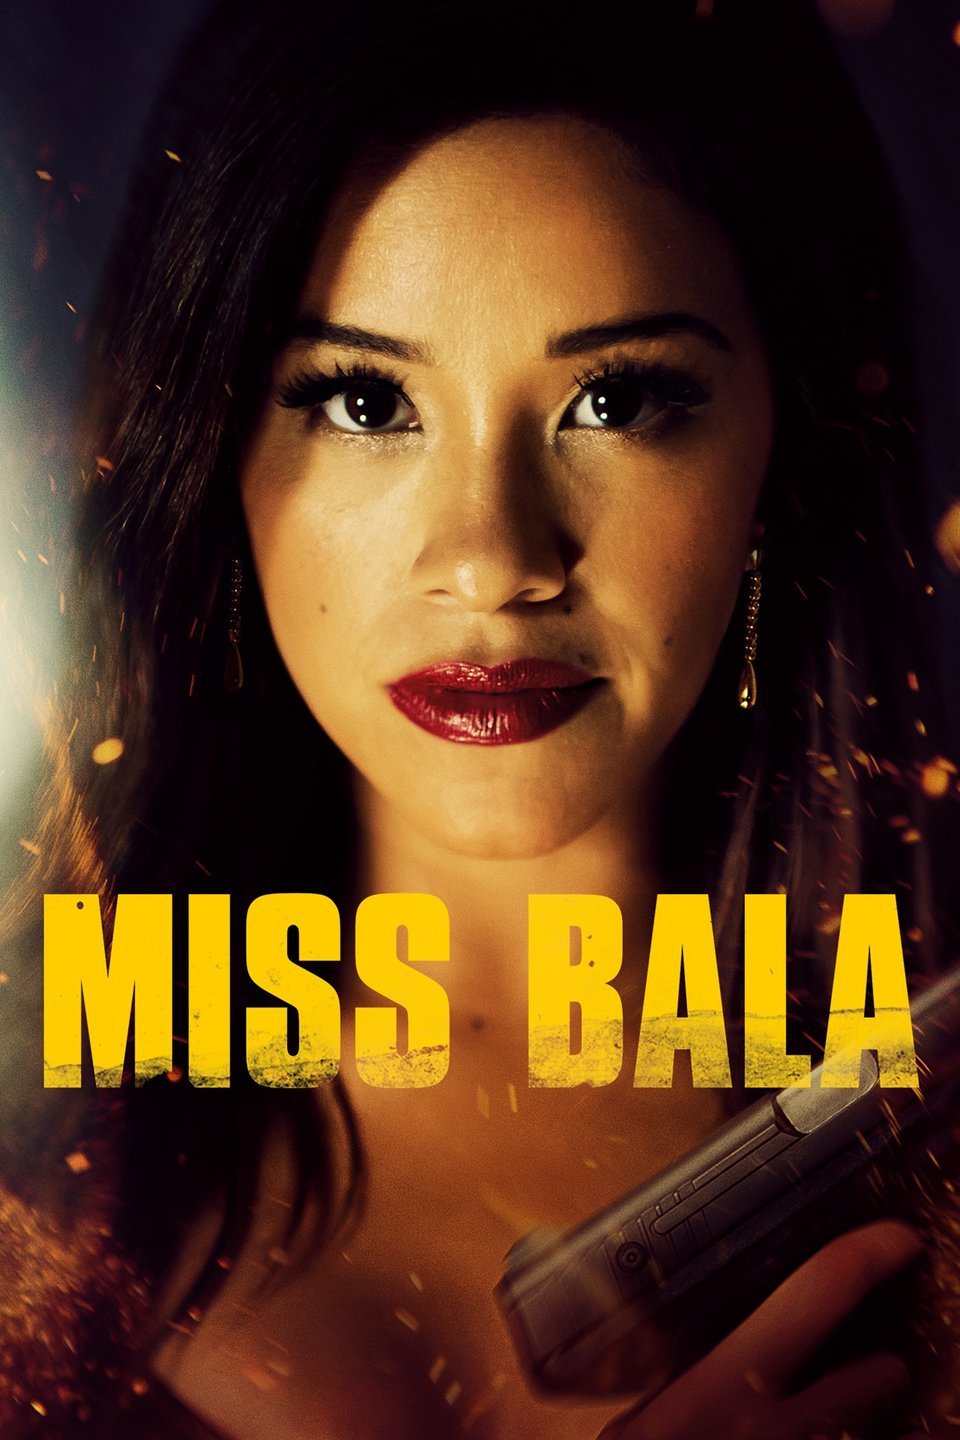 Miss Bala – Enjoyable Thriller, Very Scary and Fast-Paced